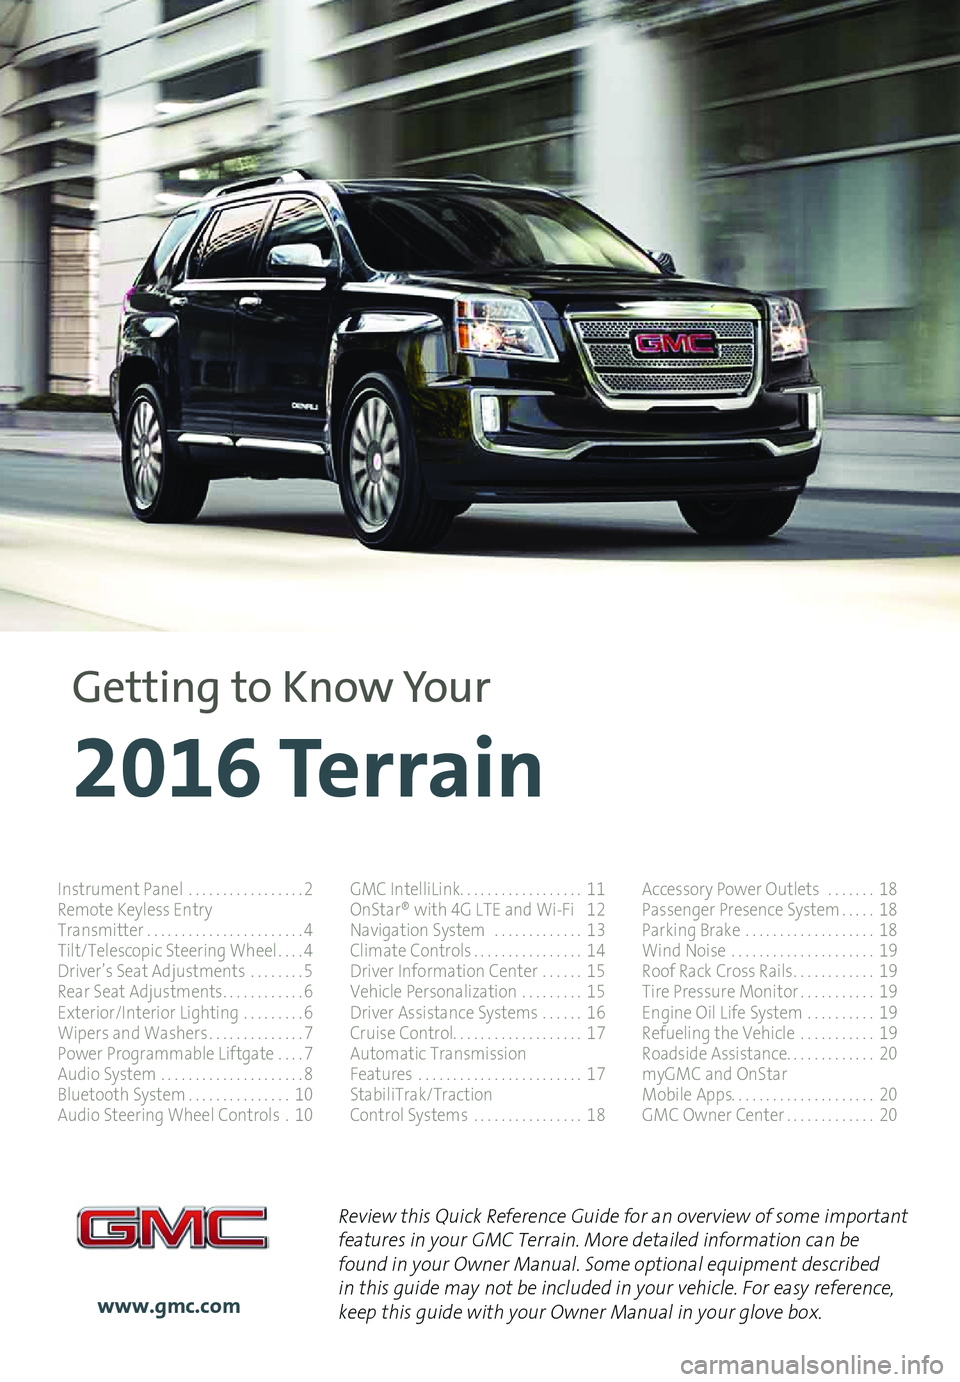 GMC TERRAIN 2016  Get To Know Guide 1
Review this Quick Reference Guide for an overview of some important features in your GMC Terrain. More detailed information can be found in your Owner Manual. Some optional equipment described in th